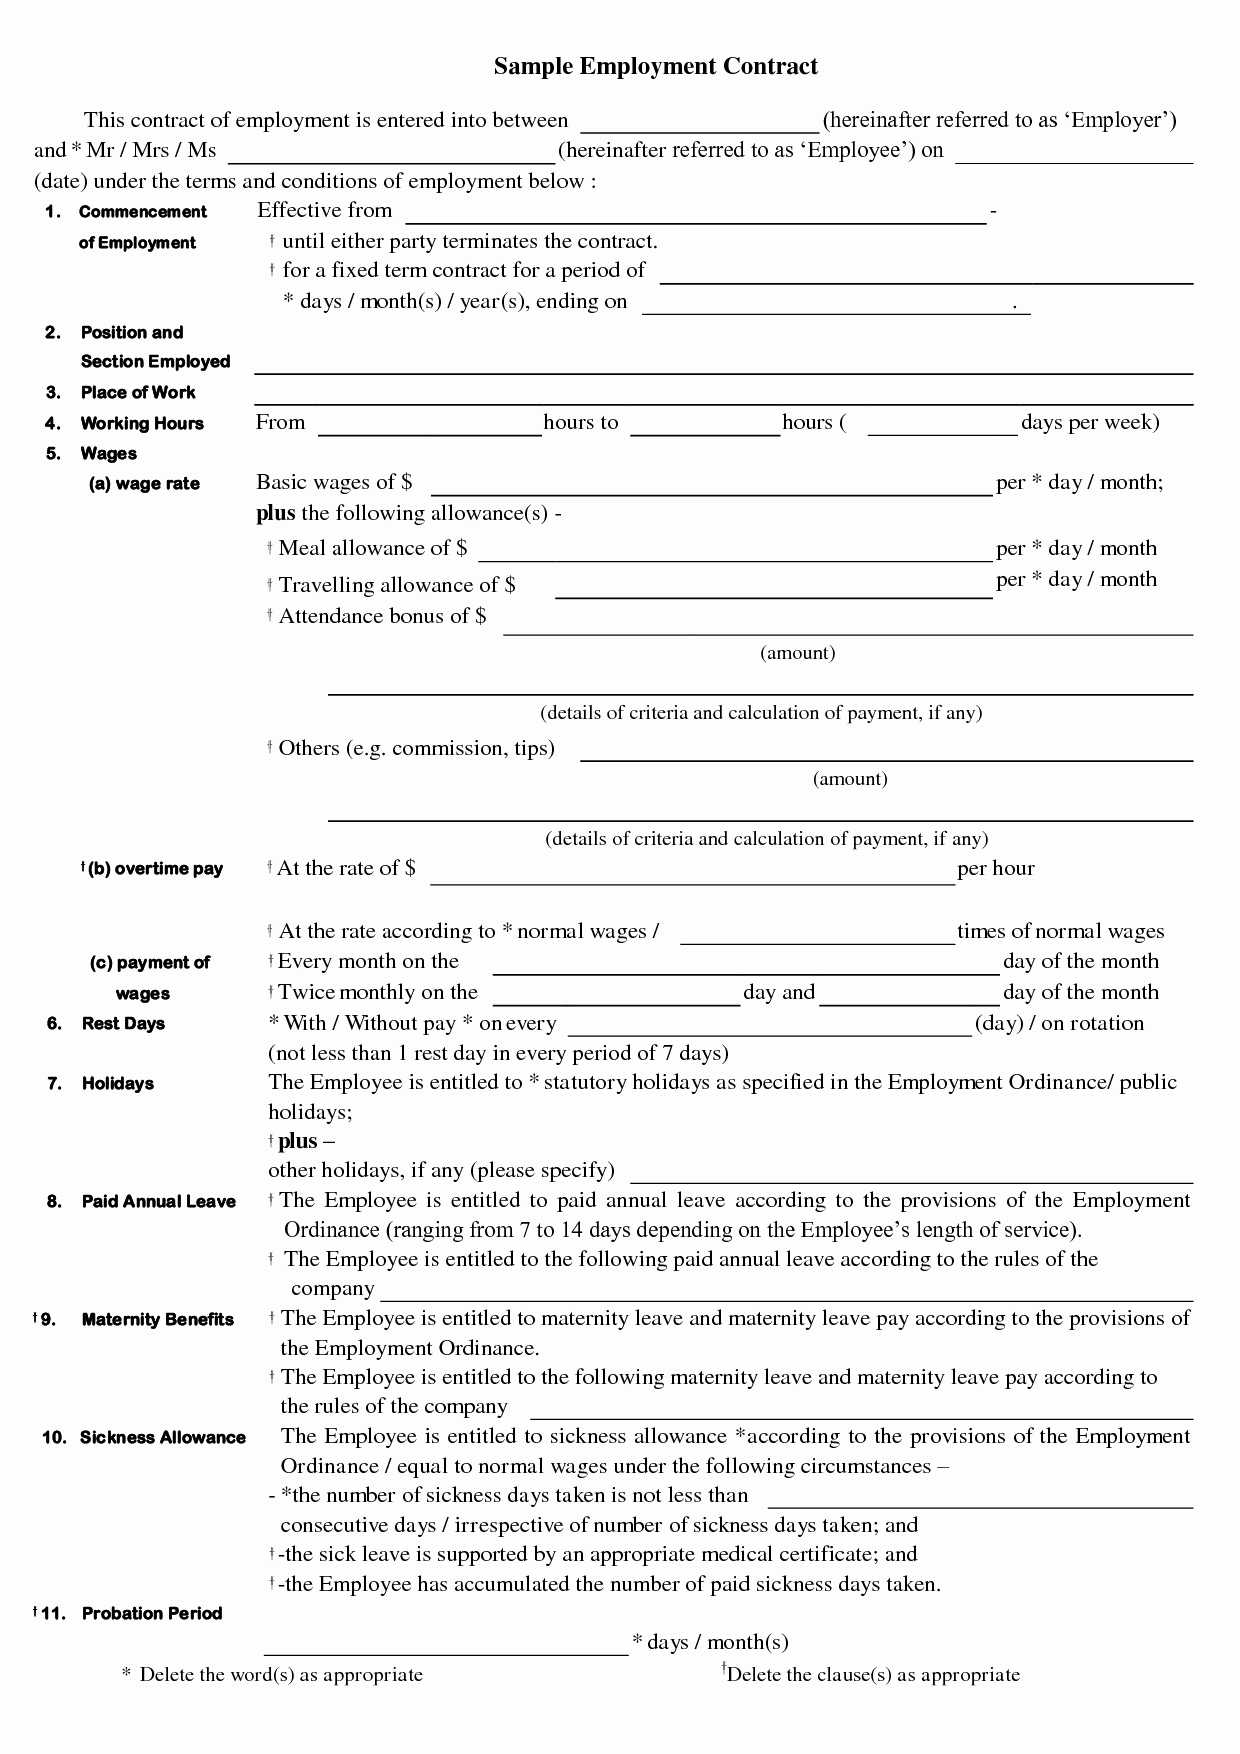 Acceleration Calculations Worksheet Along with 12 Unique Worksheet Games